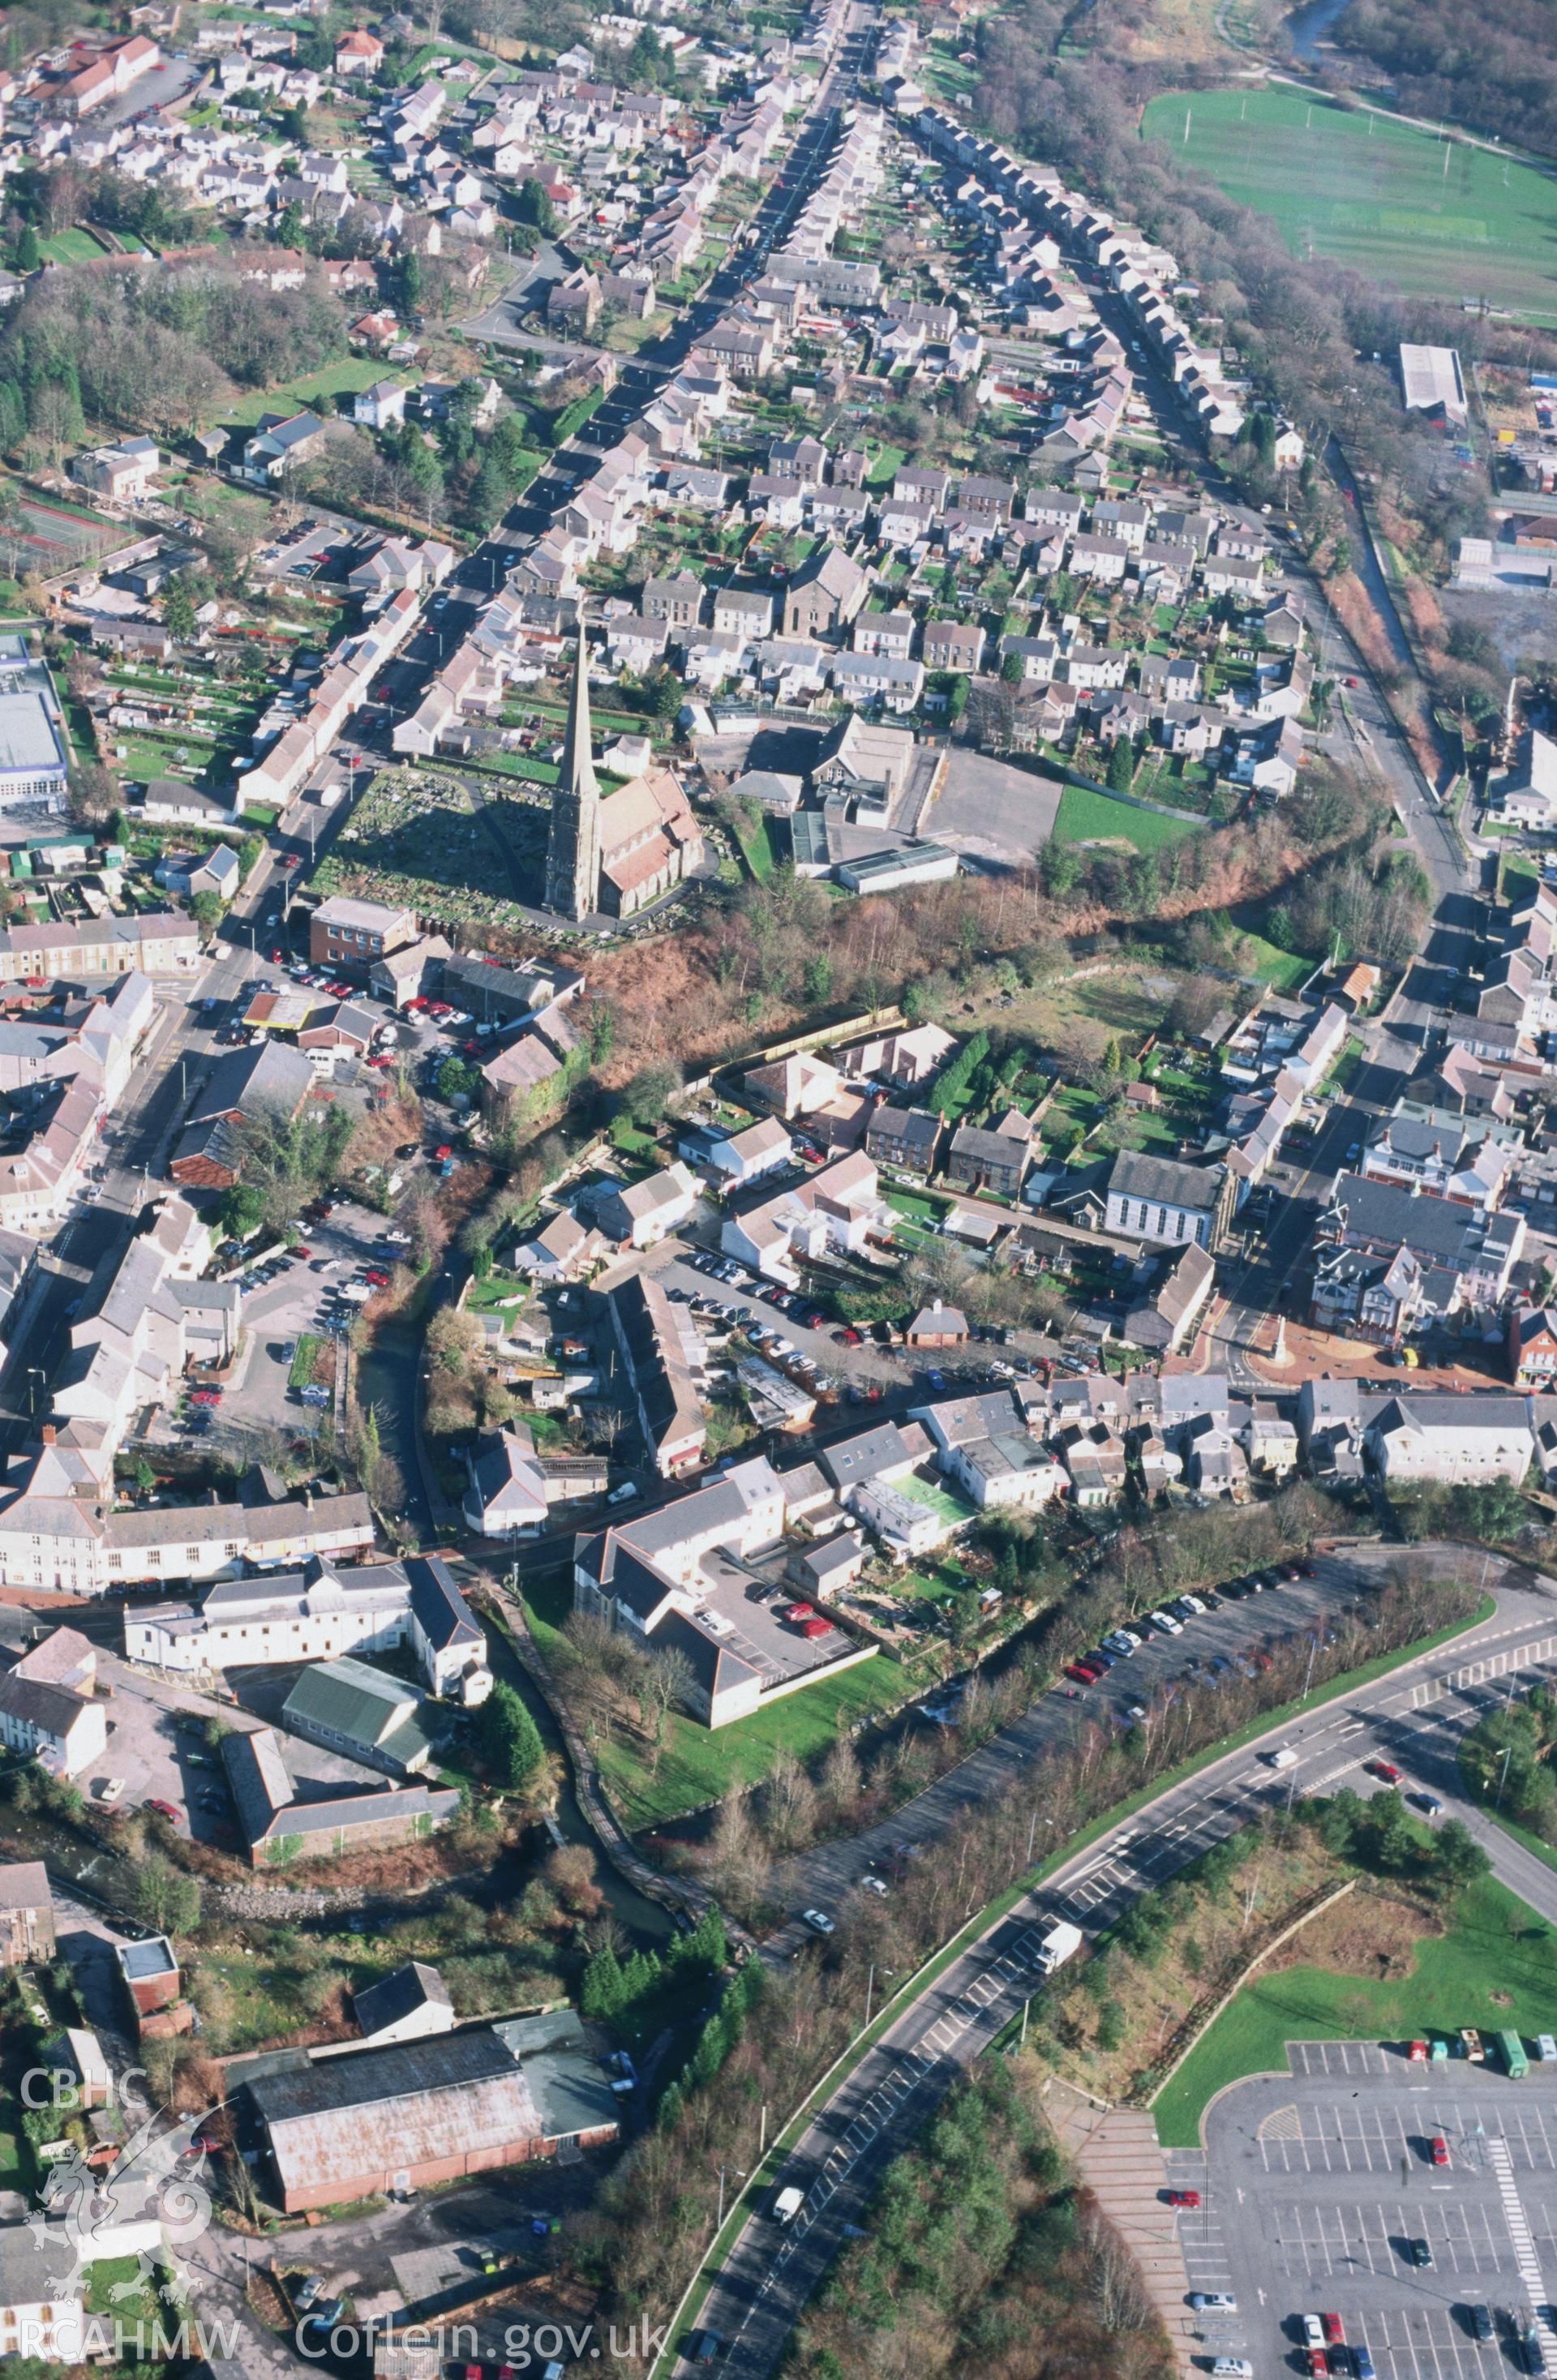 Slide of RCAHMW colour oblique aerial photograph of Pontardawe Town, taken by T.G. Driver, 15/2/2002.